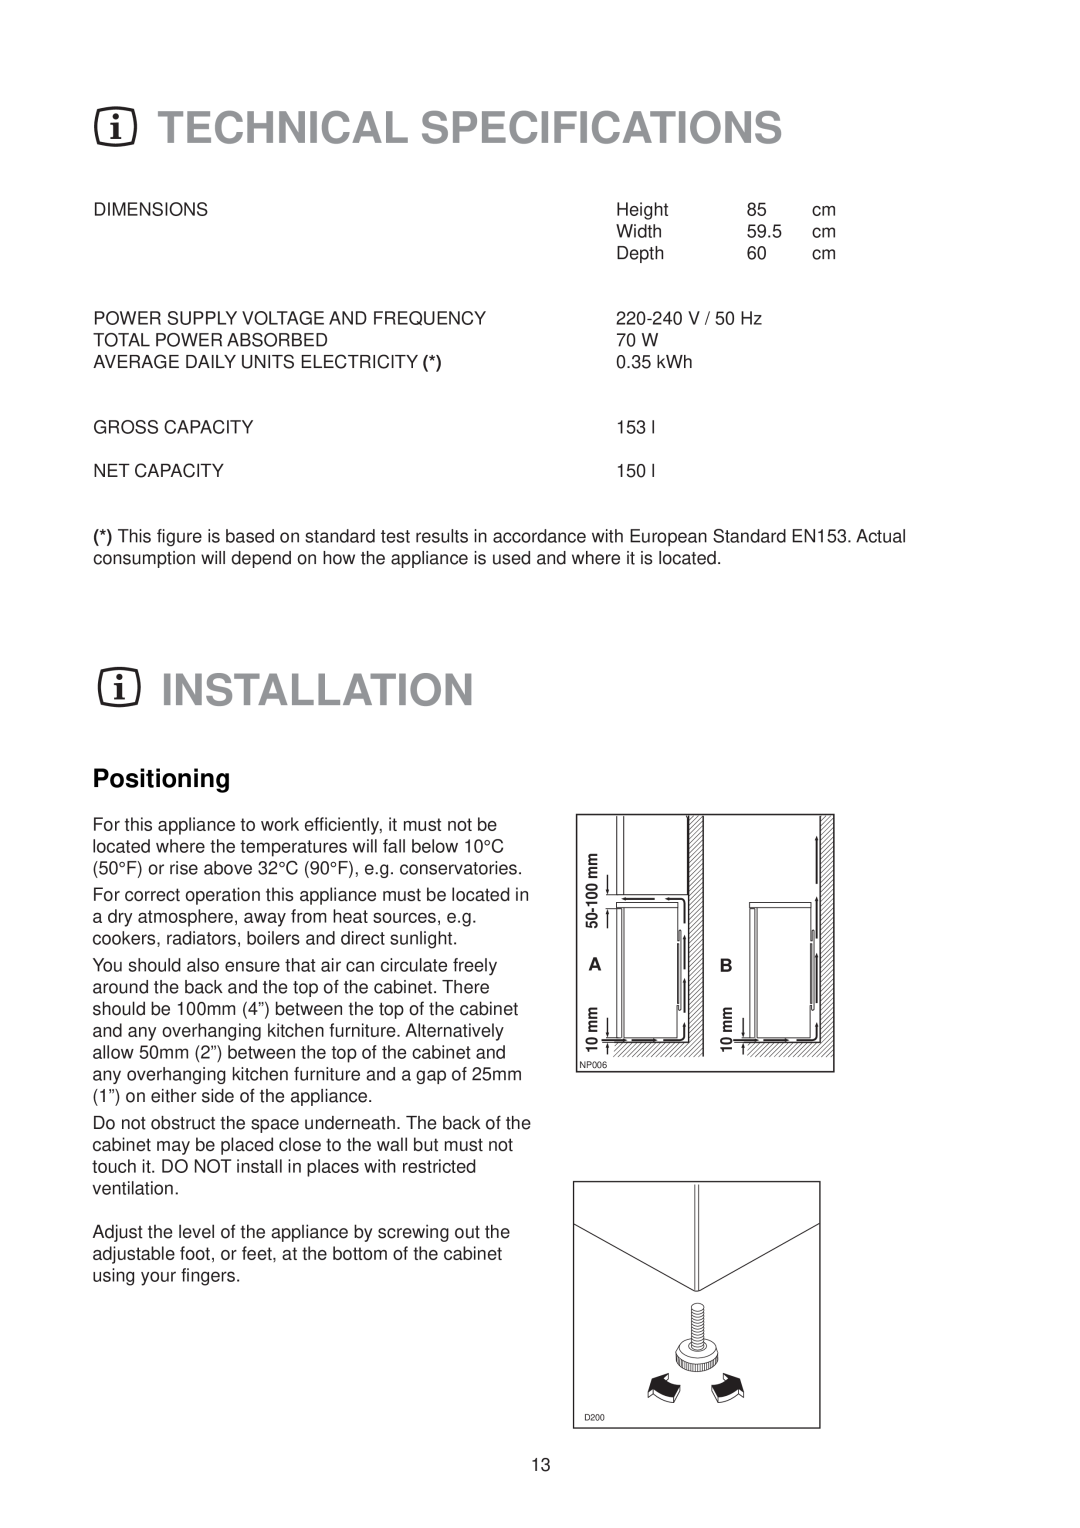 Zanussi ZTR 57 R manual Technical Specifications, Installation, Positioning 